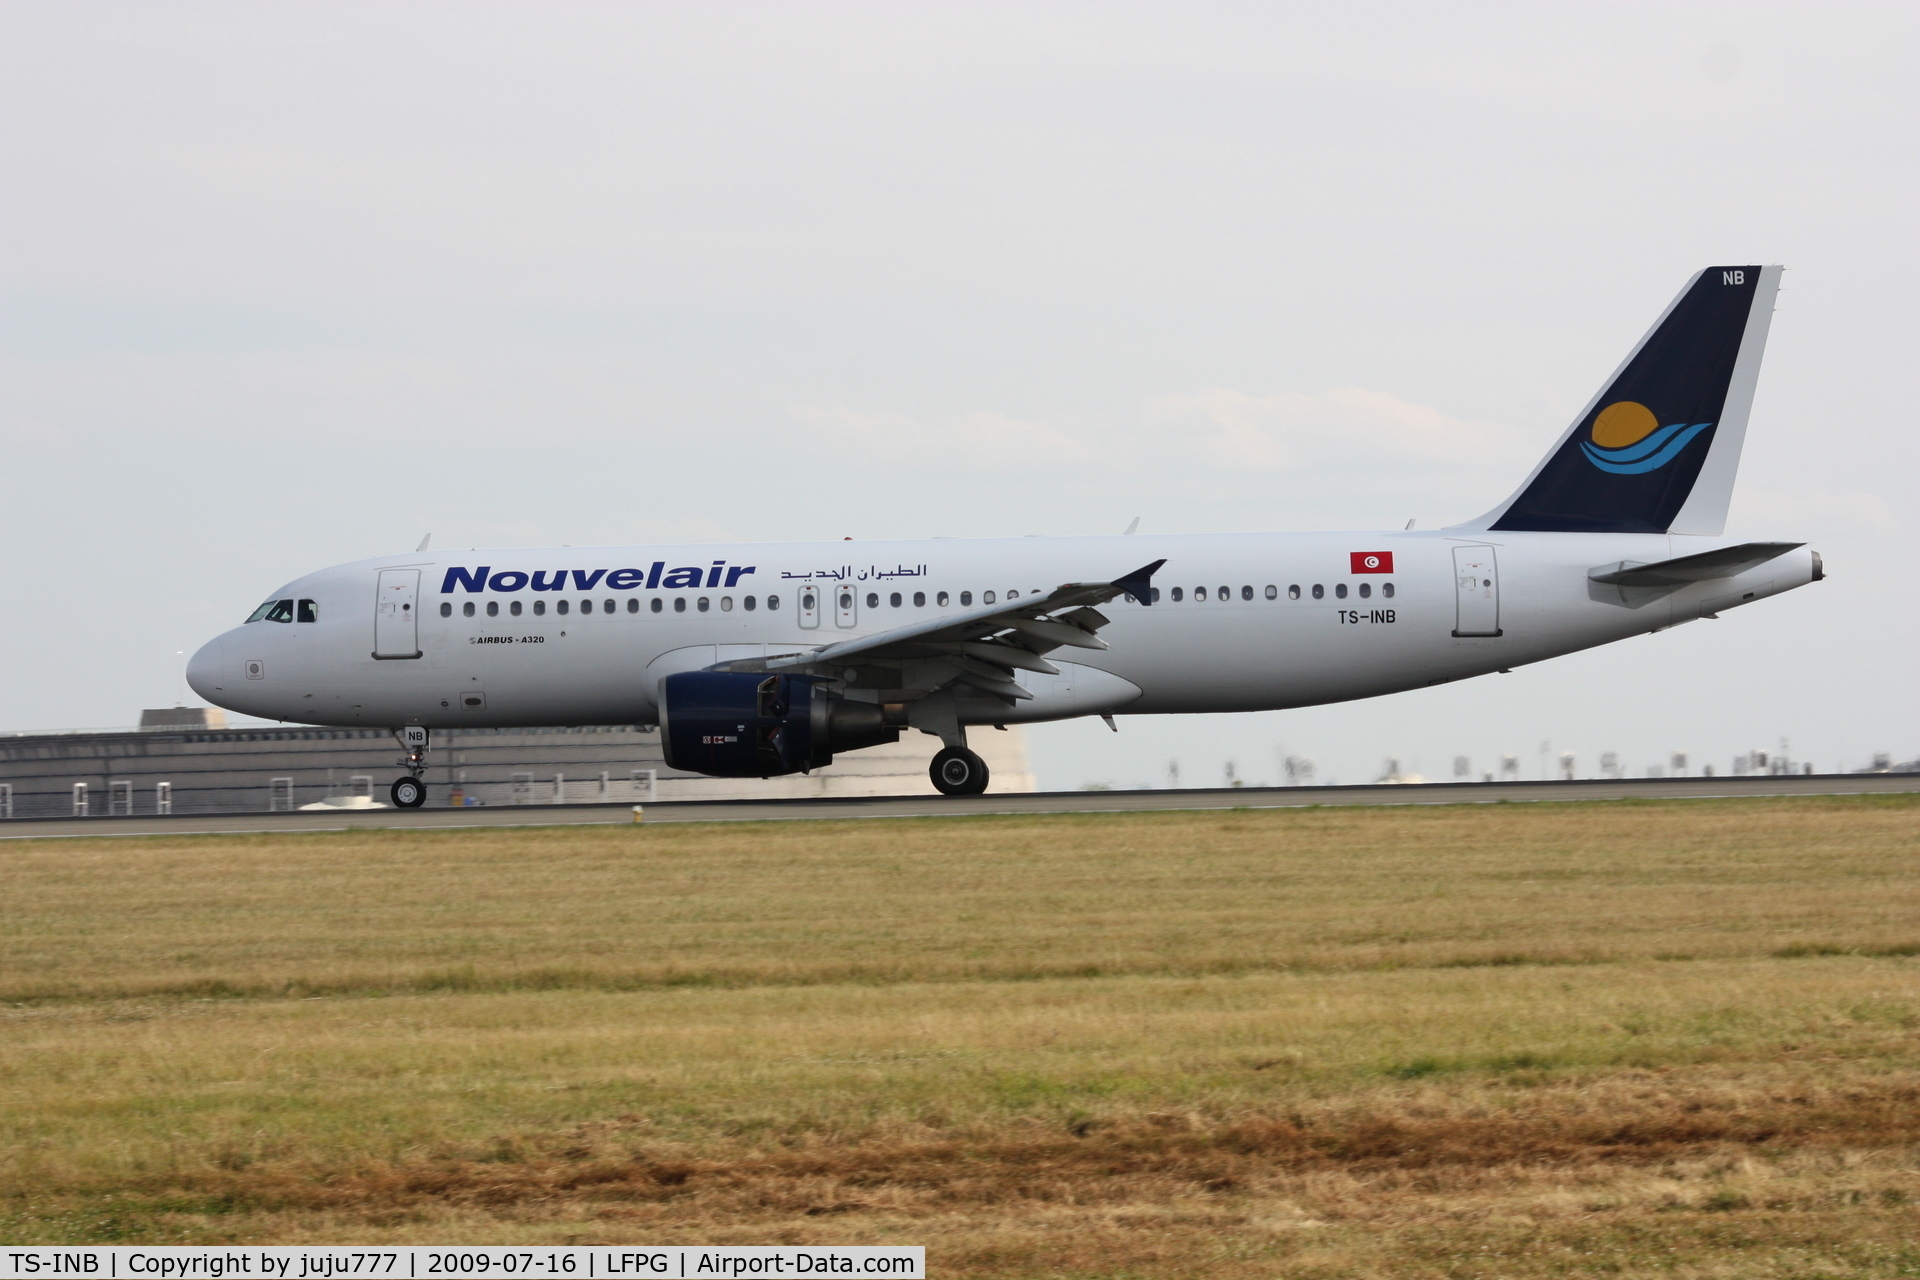 TS-INB, 2000 Airbus A320-214 C/N 1175, on landing at CDG whis new color